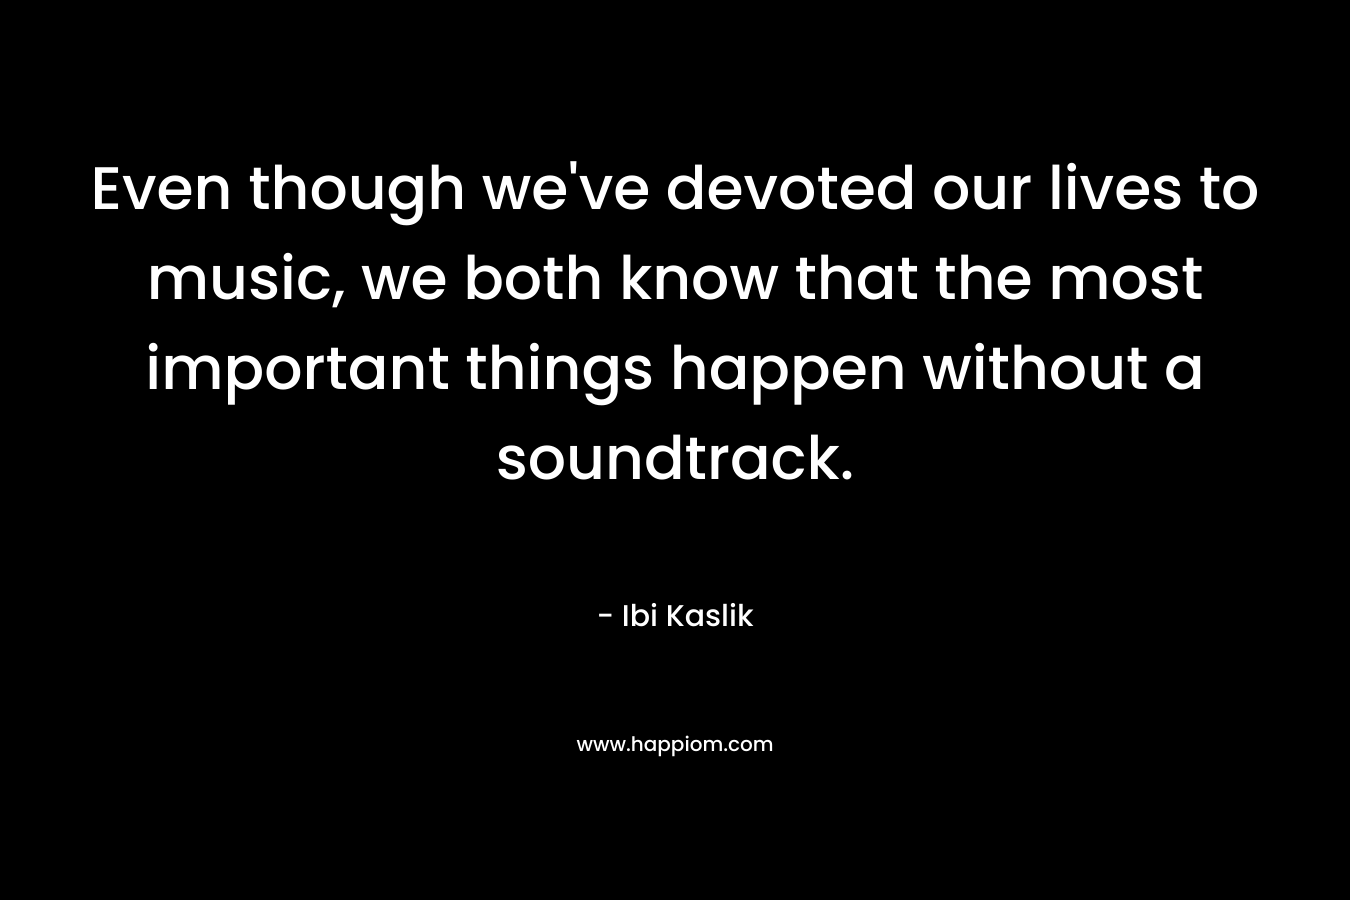 Even though we've devoted our lives to music, we both know that the most important things happen without a soundtrack.